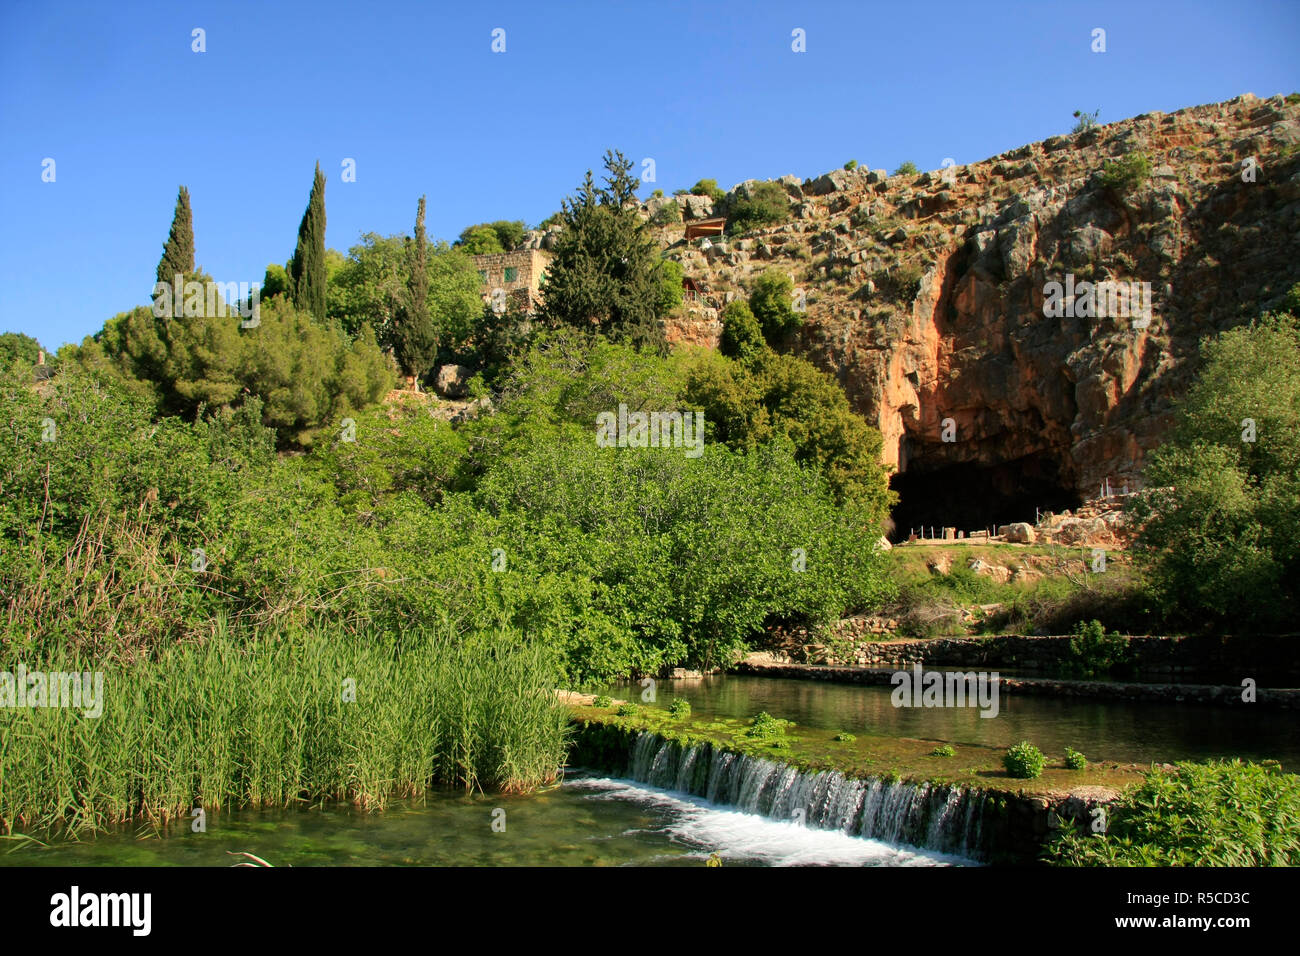 Israel, Golan Heights, the Banias stream, a source of the Jordan River, the Grotto of Pan in the background Stock Photo